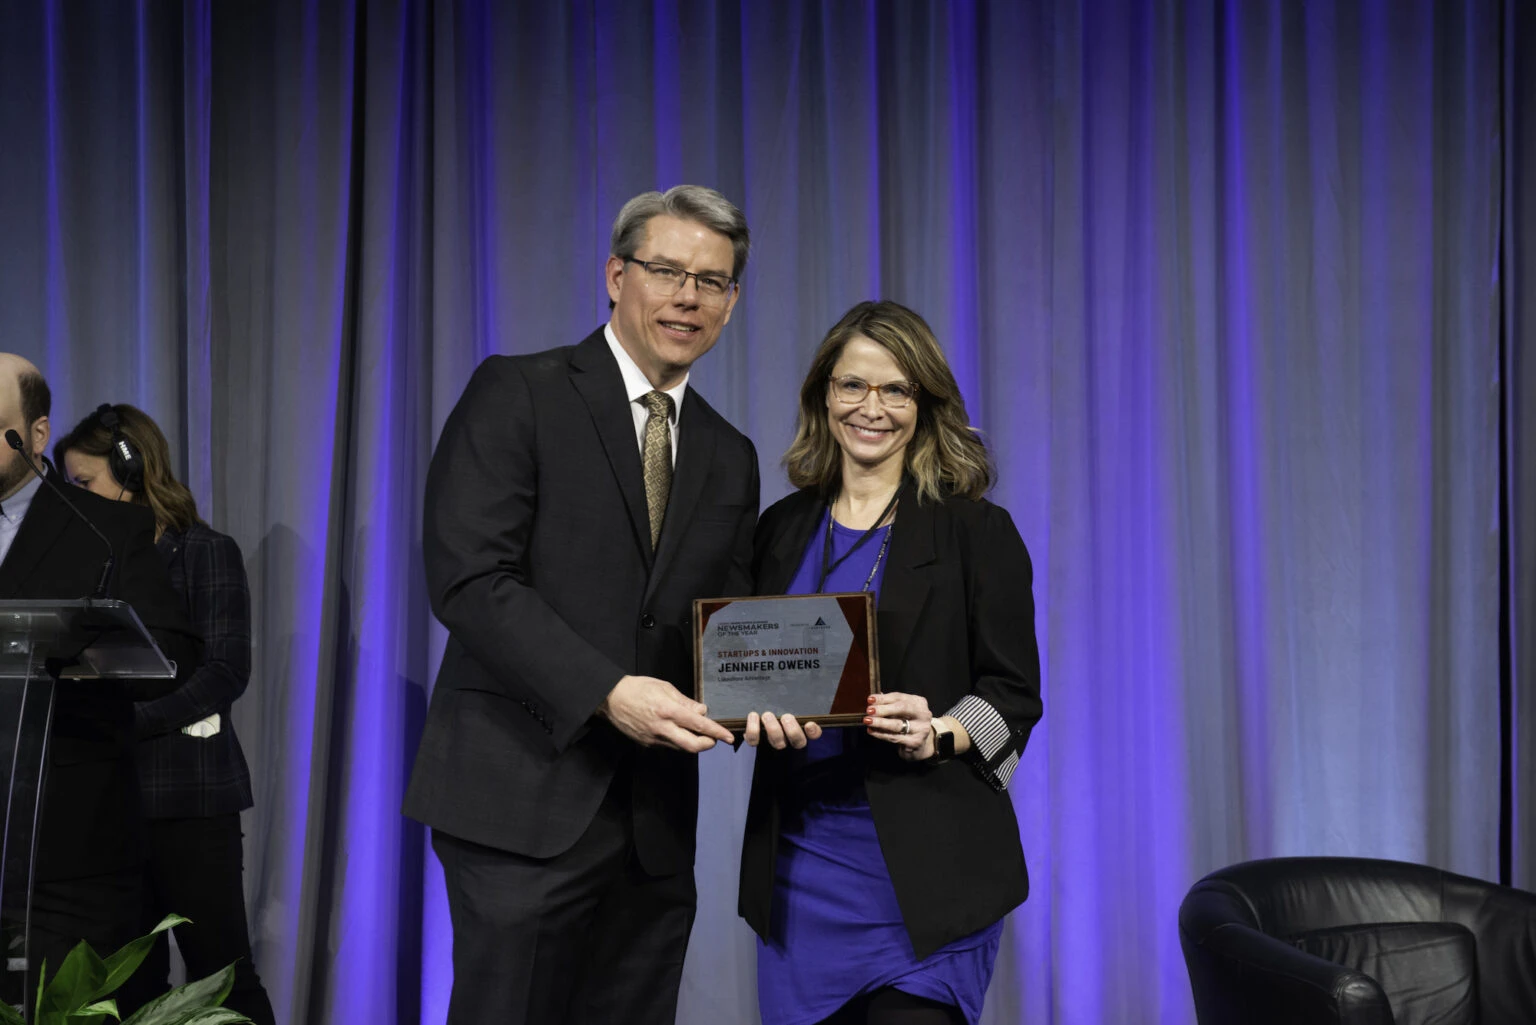 Jennifer Owens named Newsmaker of the Year for startups and innovation by Crain’s blog image 